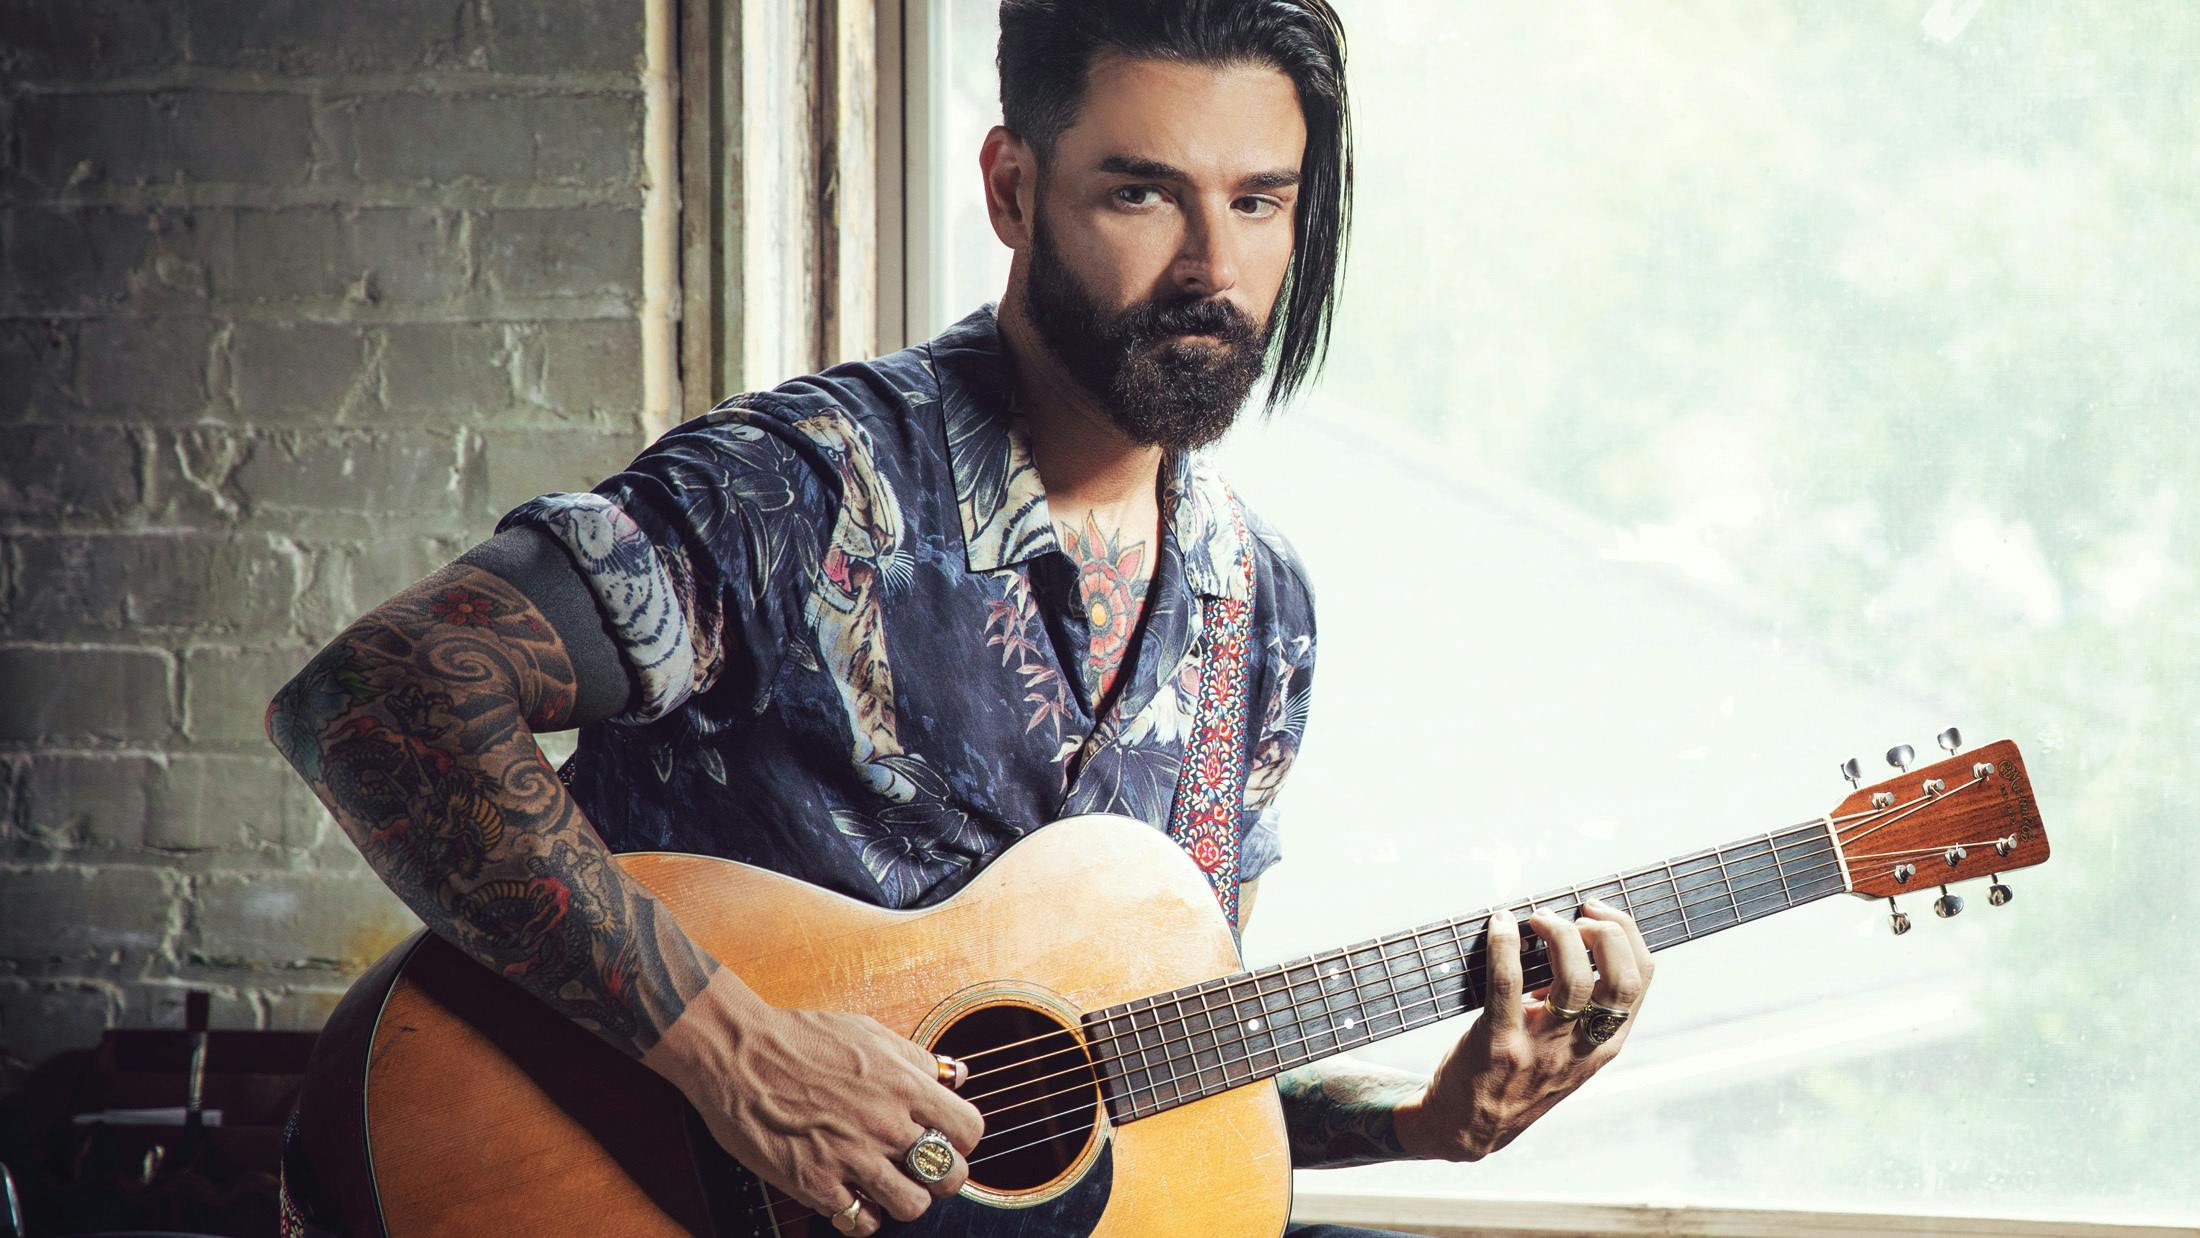 Dashboard Confessional: “I knew I’d be laughed at in the hardcore scene... But I knew the acoustic guitar could be punk as f*ck”